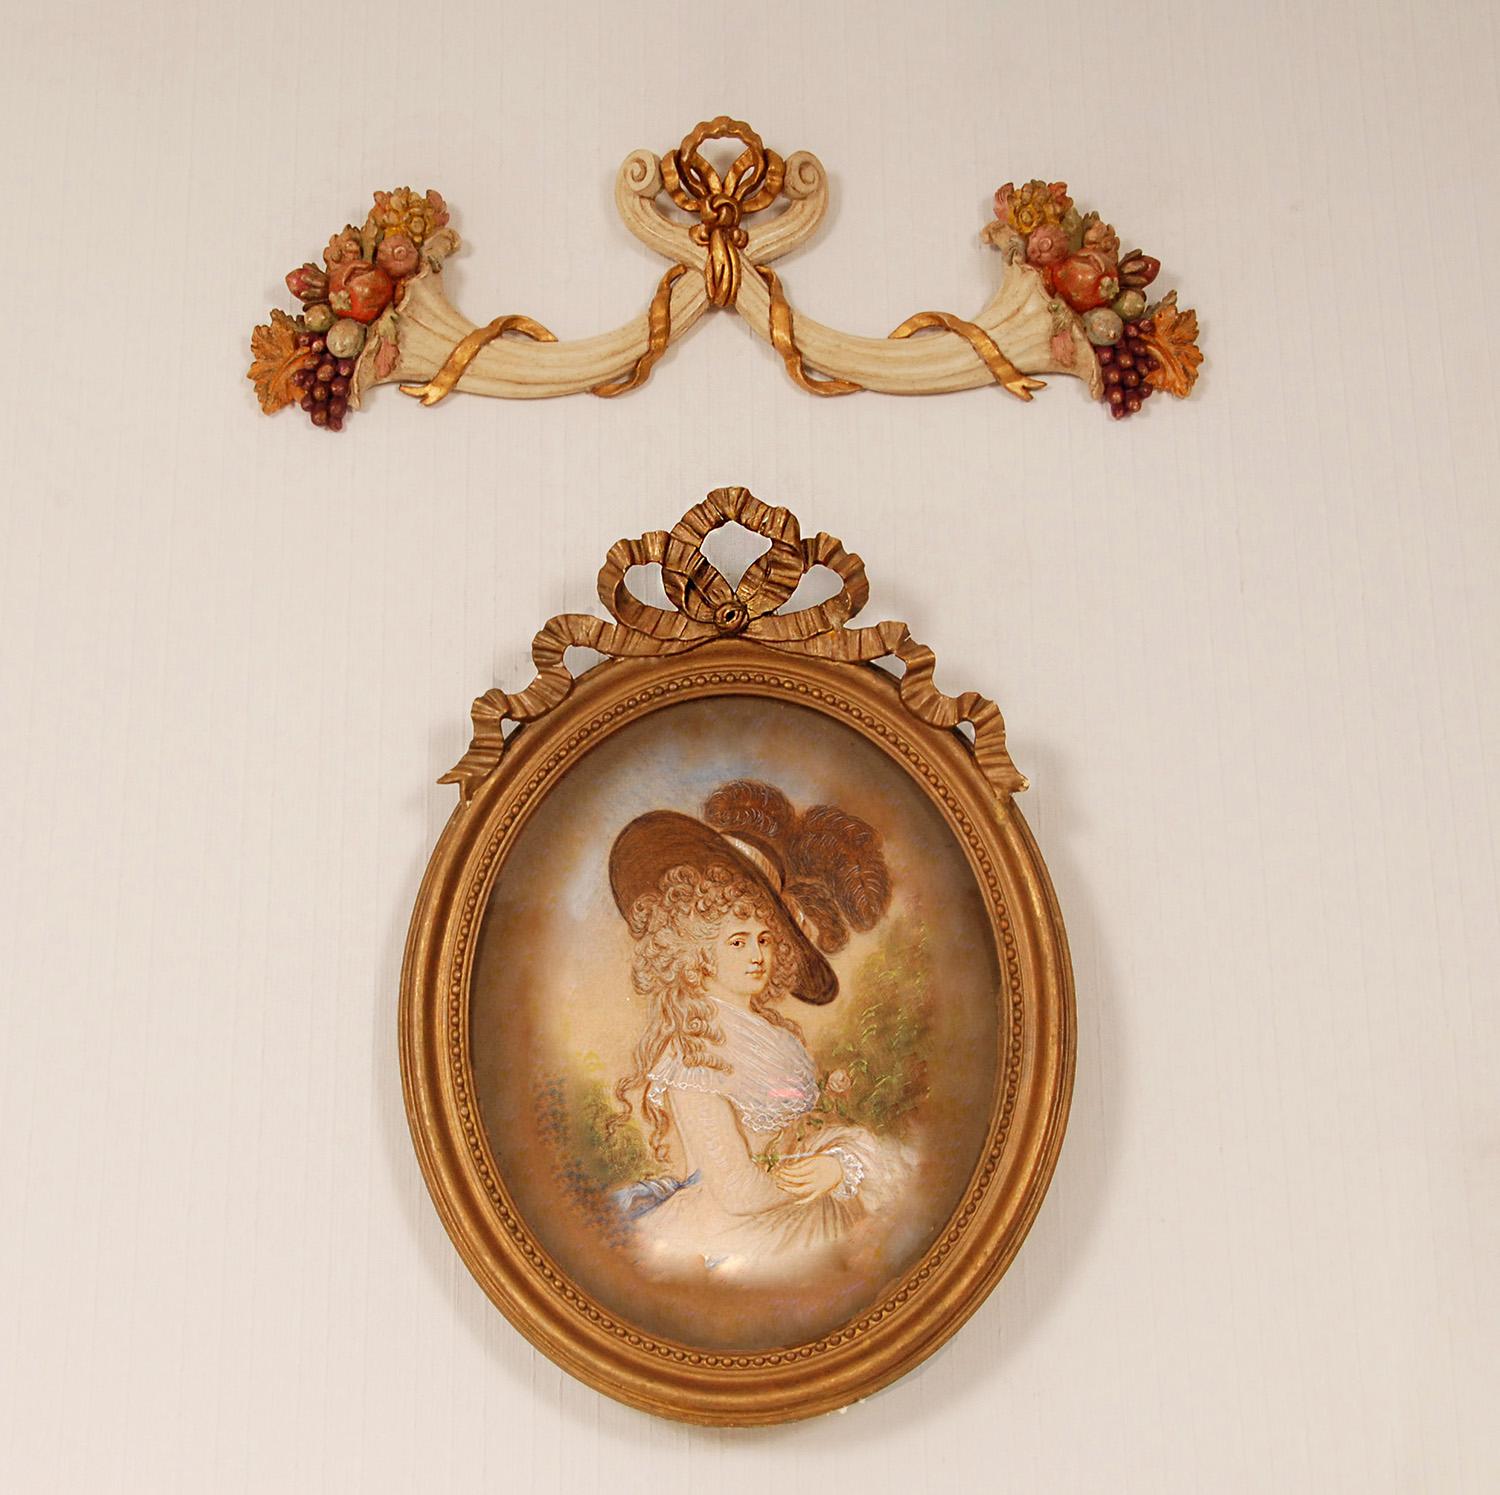 Style: Italian, French Country, French provincial, Louis XVI, Antique, Neoclassical, Baroque, Rococo
Product: Carved wood wall Ornament ( Painting and frame is not included)
Material: Fruitwood and lacquer
Technique: Hand carved, hand lacquered and